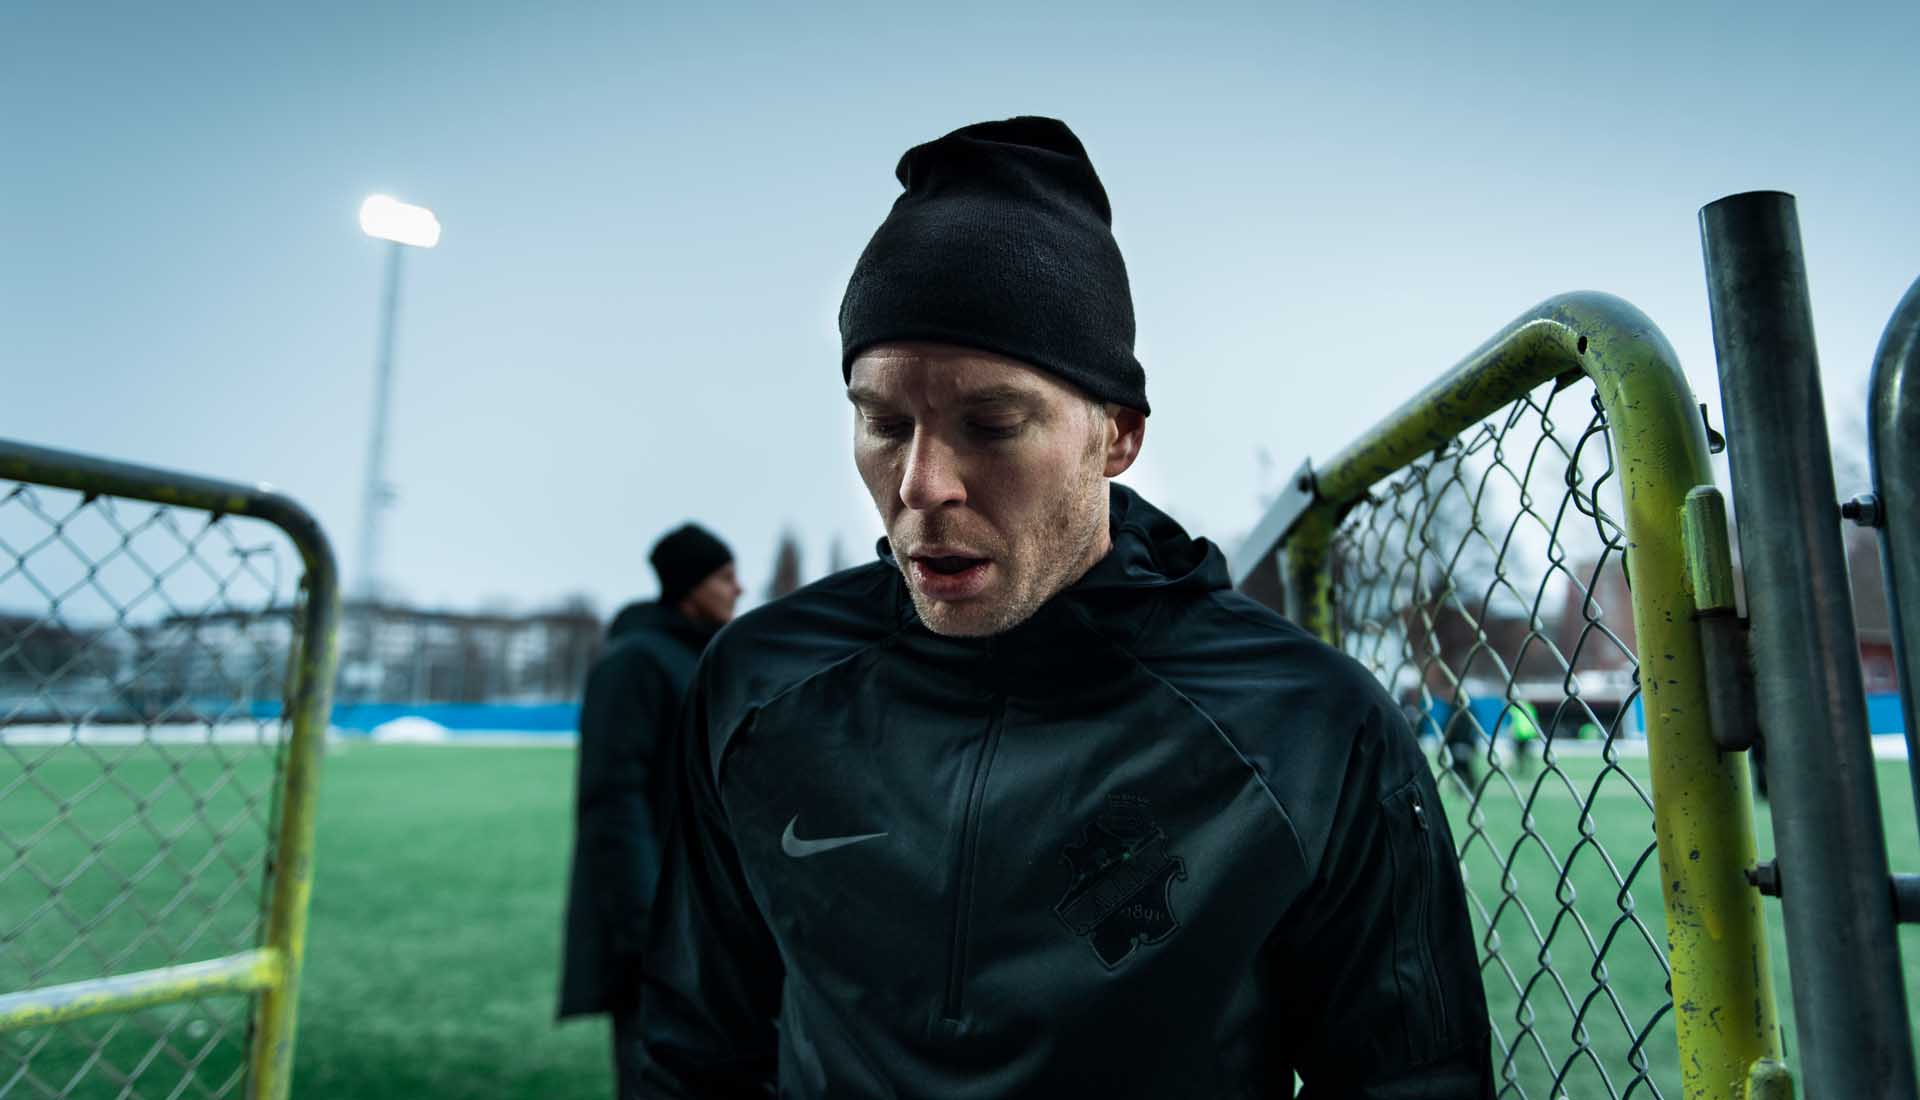 AIK Debut Black Edition Jersey In First Pre-Season Match - SoccerBible